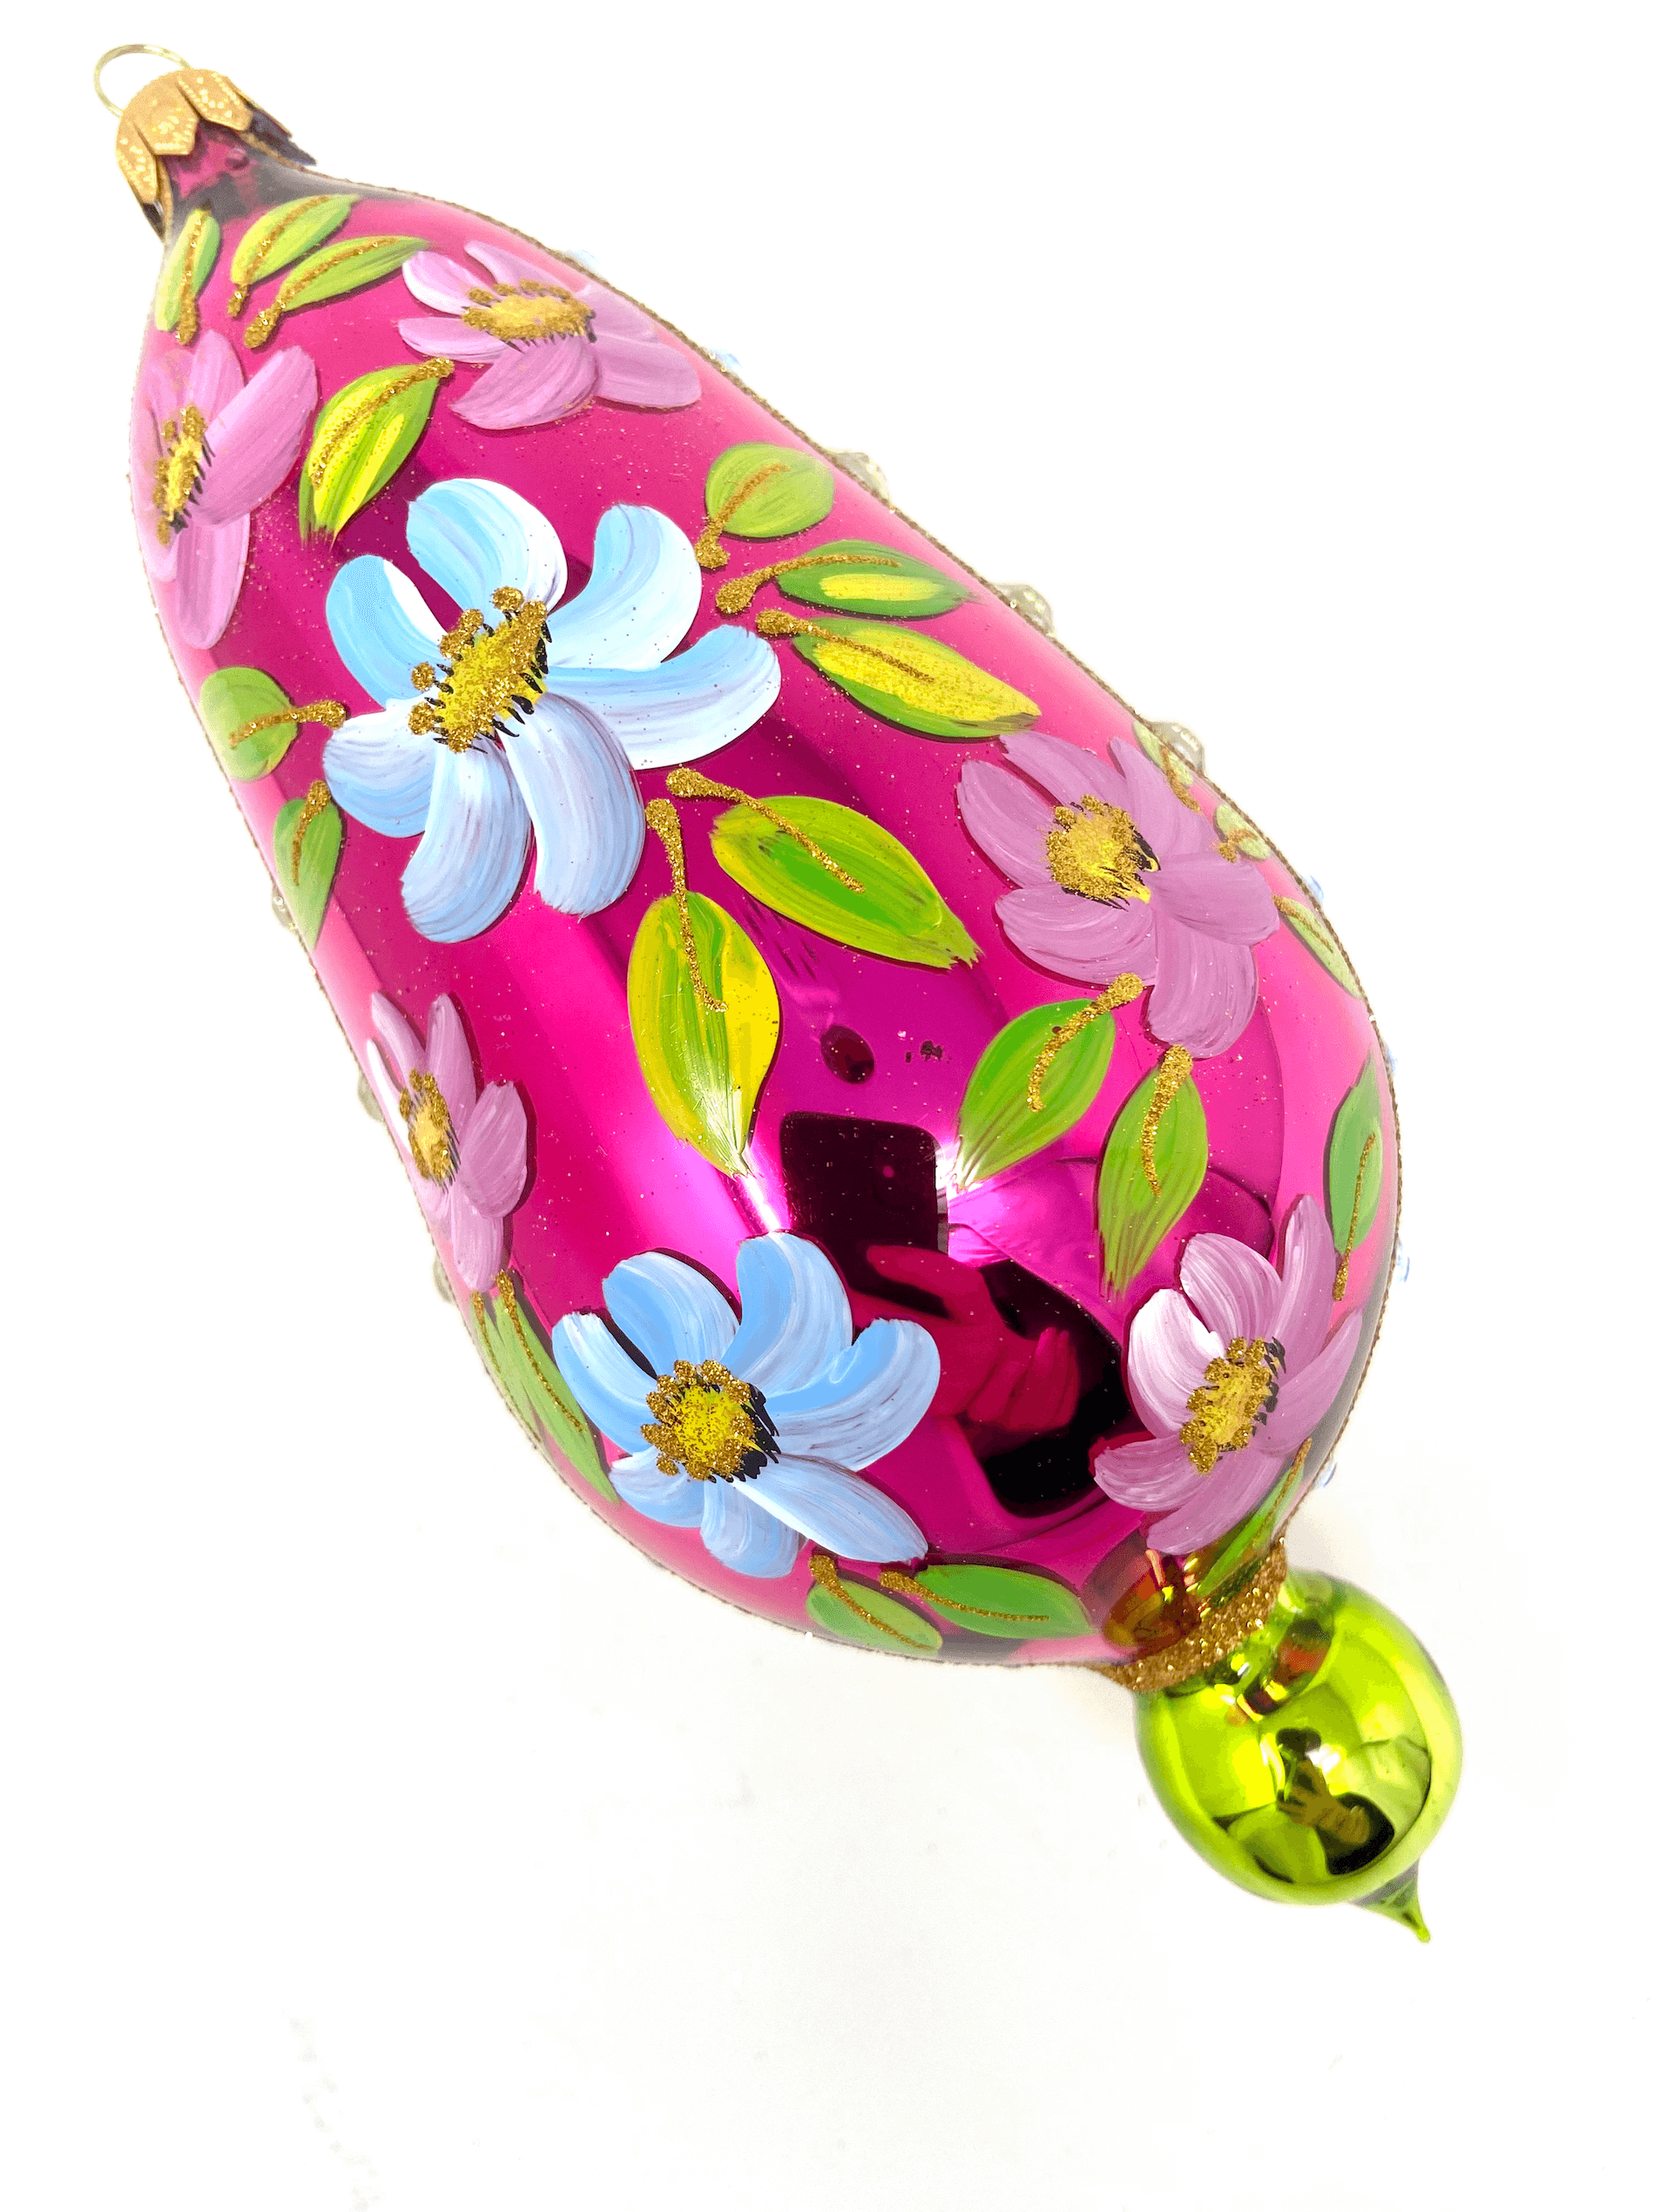 Pink eggplant shaped ornament featuring gemstones, intricate gold detailing, and hand painted floral blooms. A Christmas polish glass ornament. Floral Escape Floral Fetish.